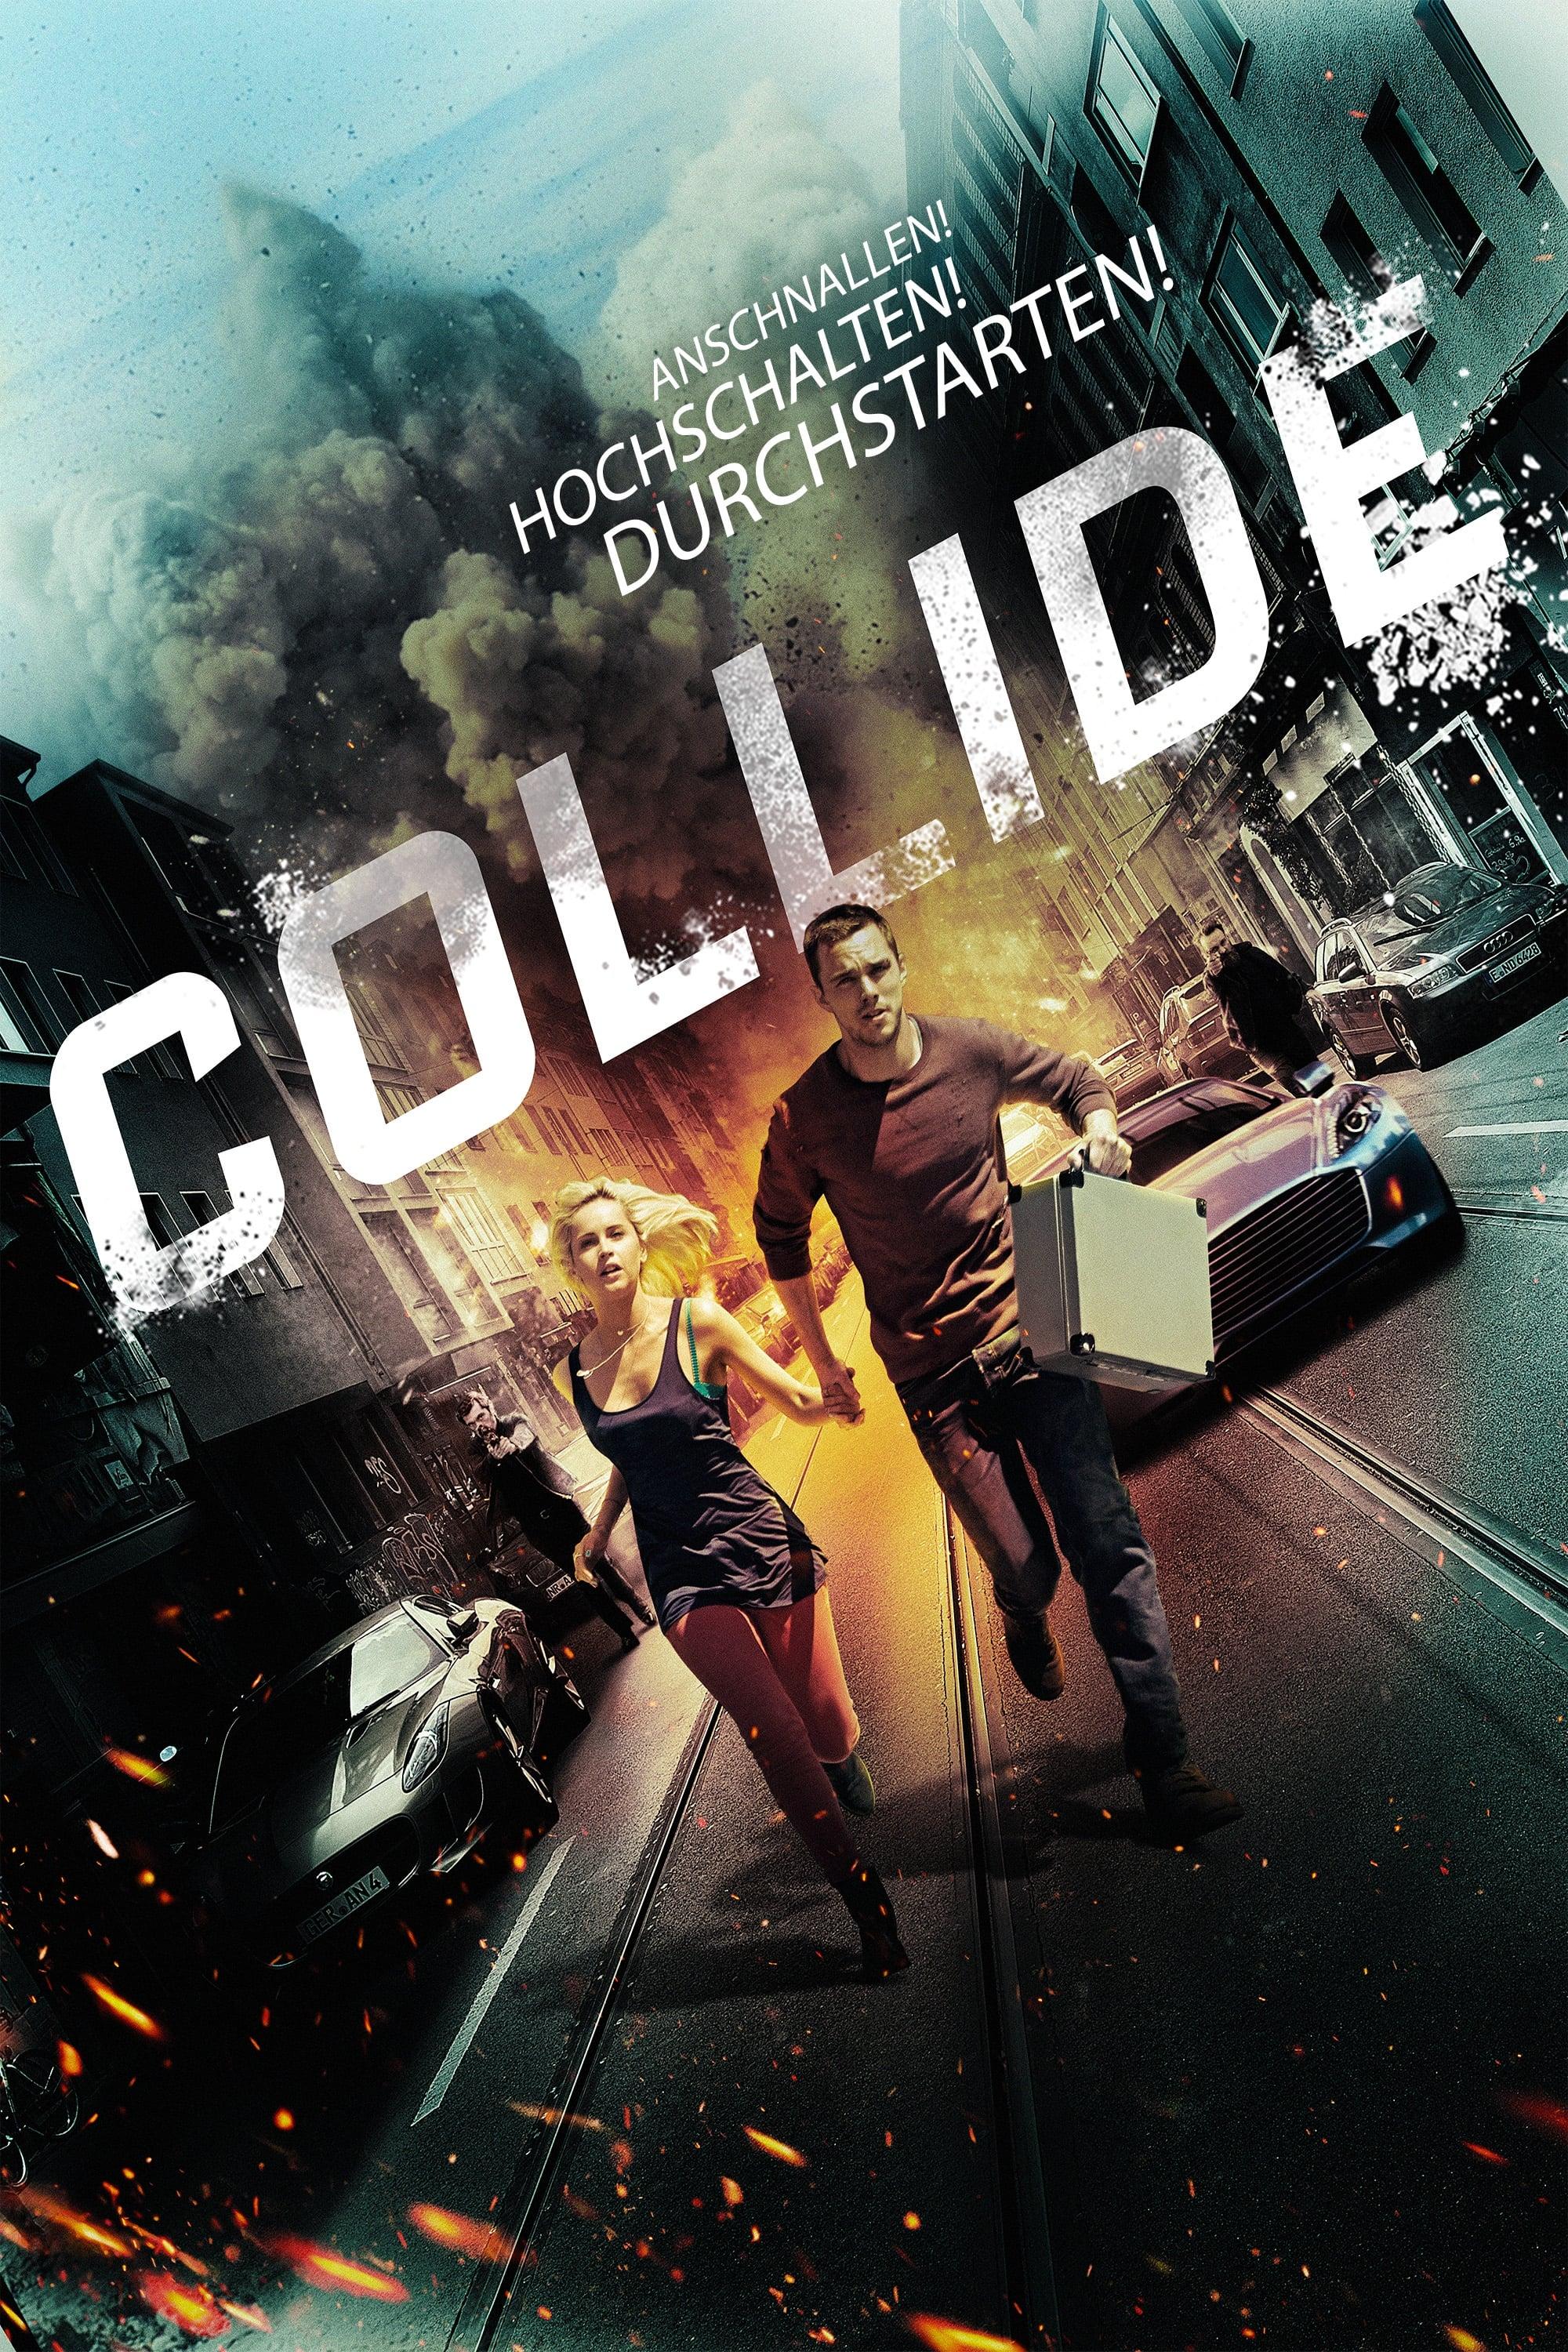 Collide poster